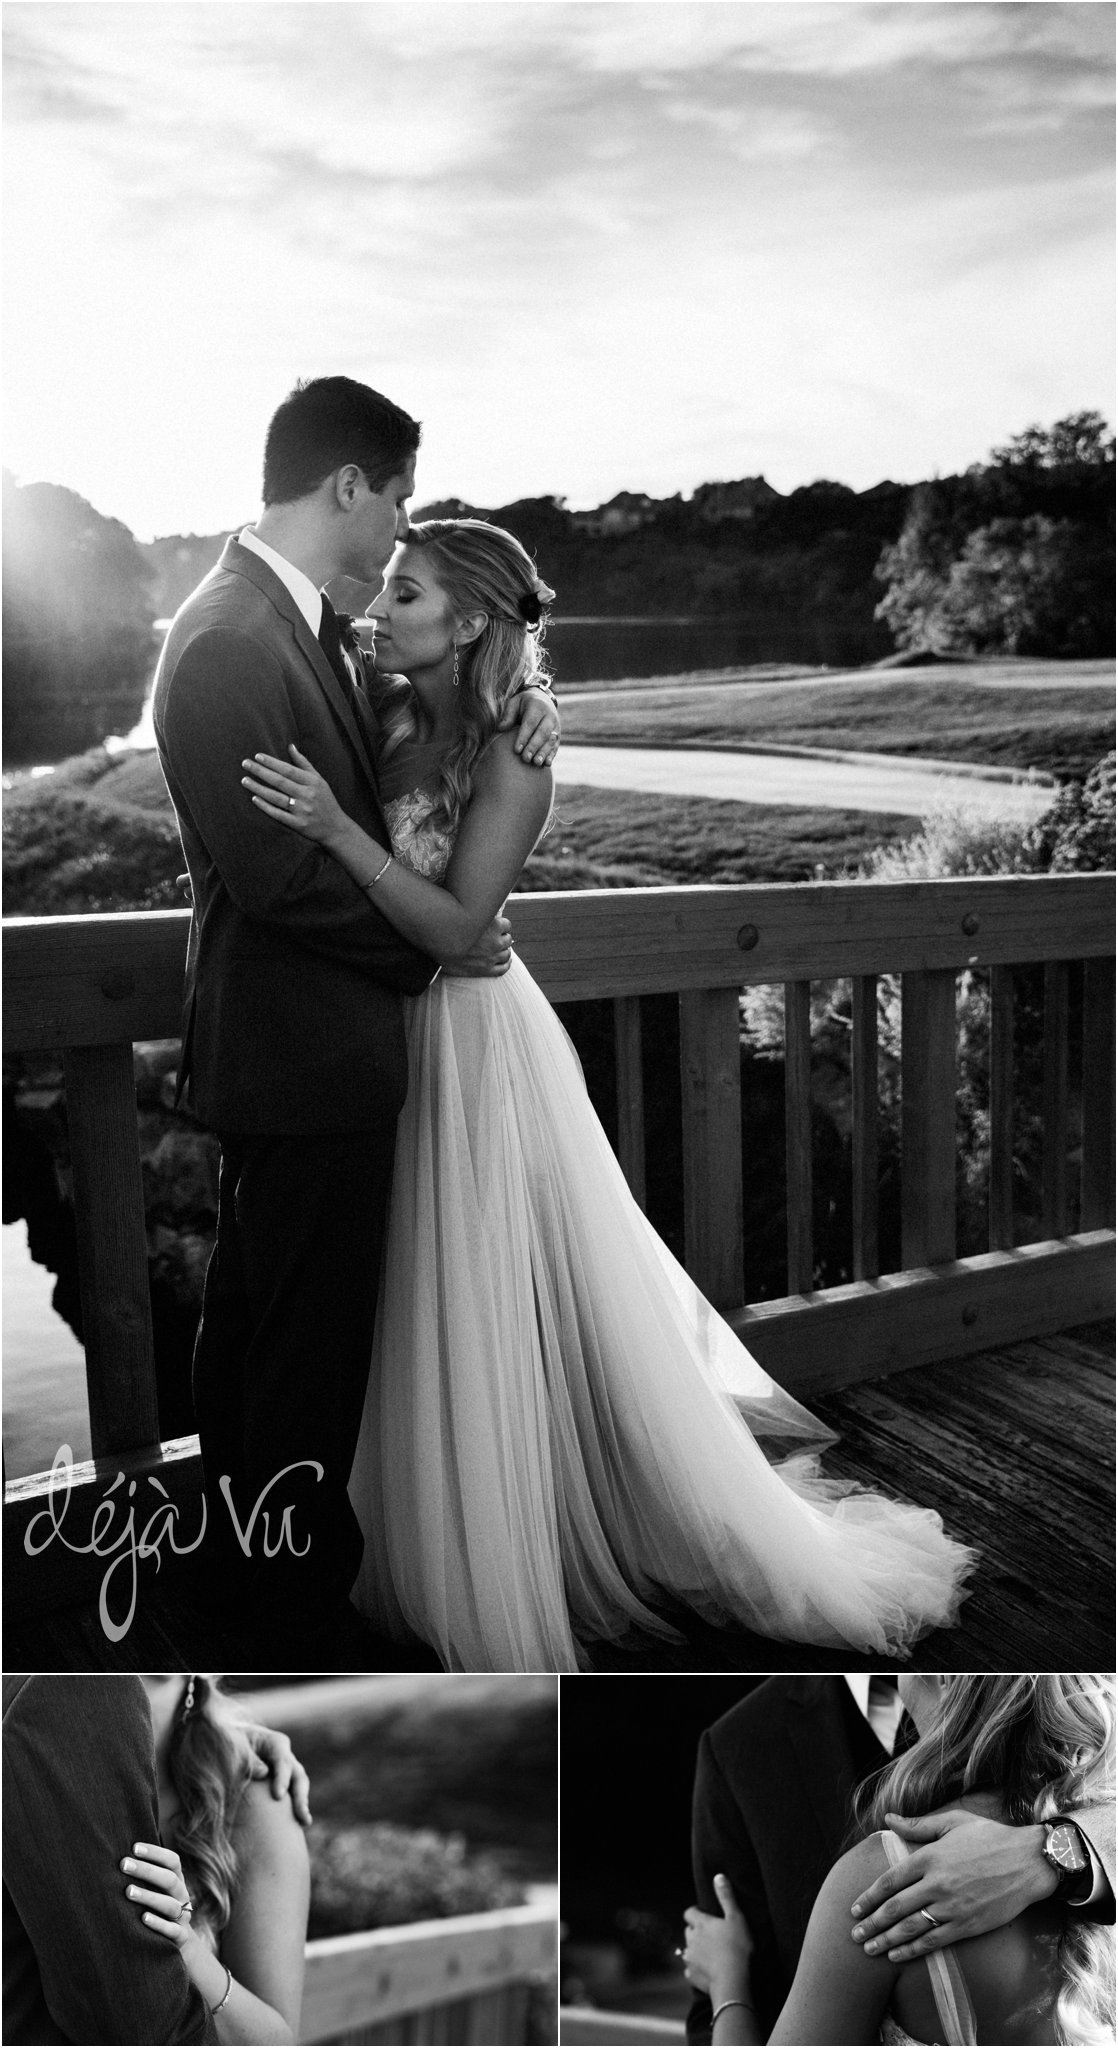 Shadow Glen Country Club Wedding | Bride and groom romantic black and white | Images by: www.feliciathephotographer.com